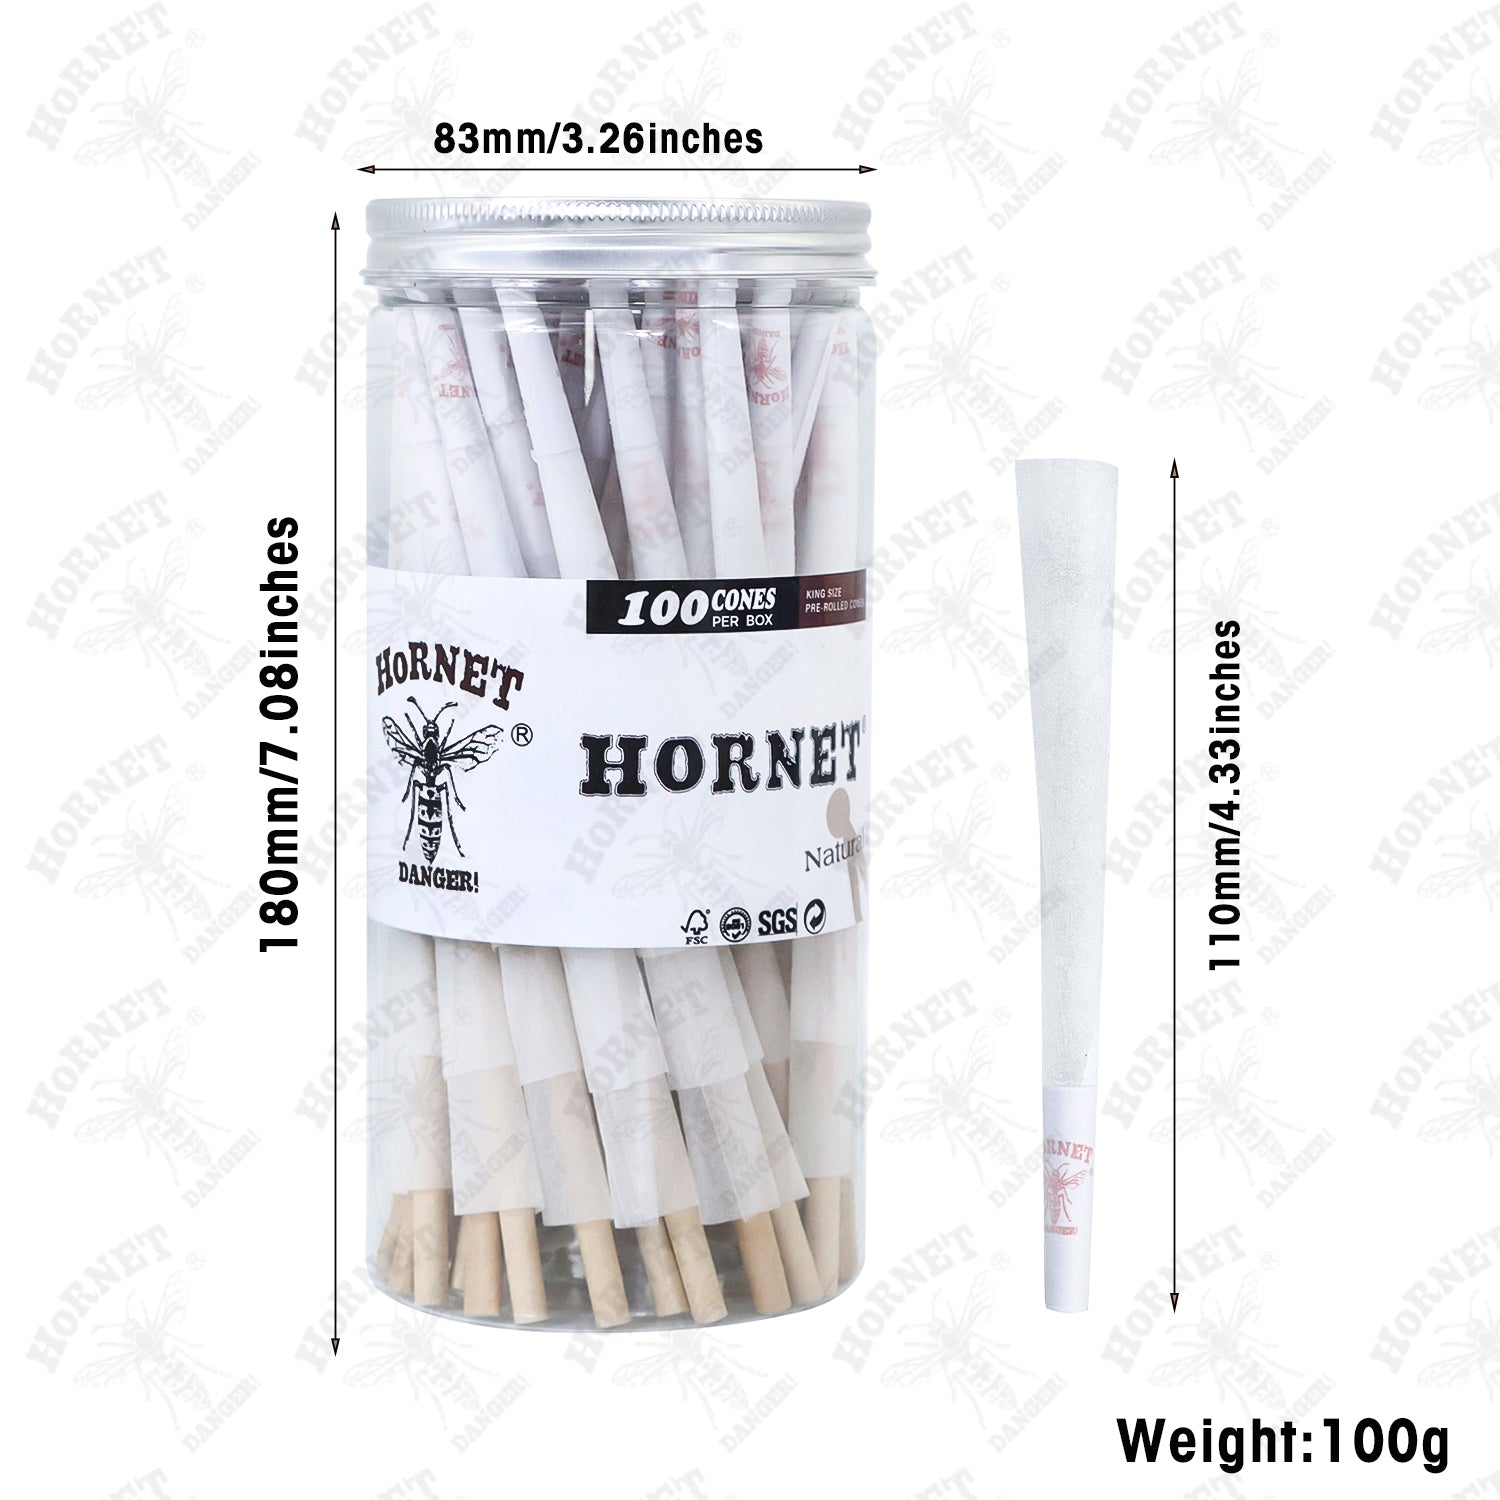 HORNET King Size White Pre Rolled Cones, Organic Rolling Cones With Tips, Slow Burning Pre Rolled Rolling Paper, 100 Pack